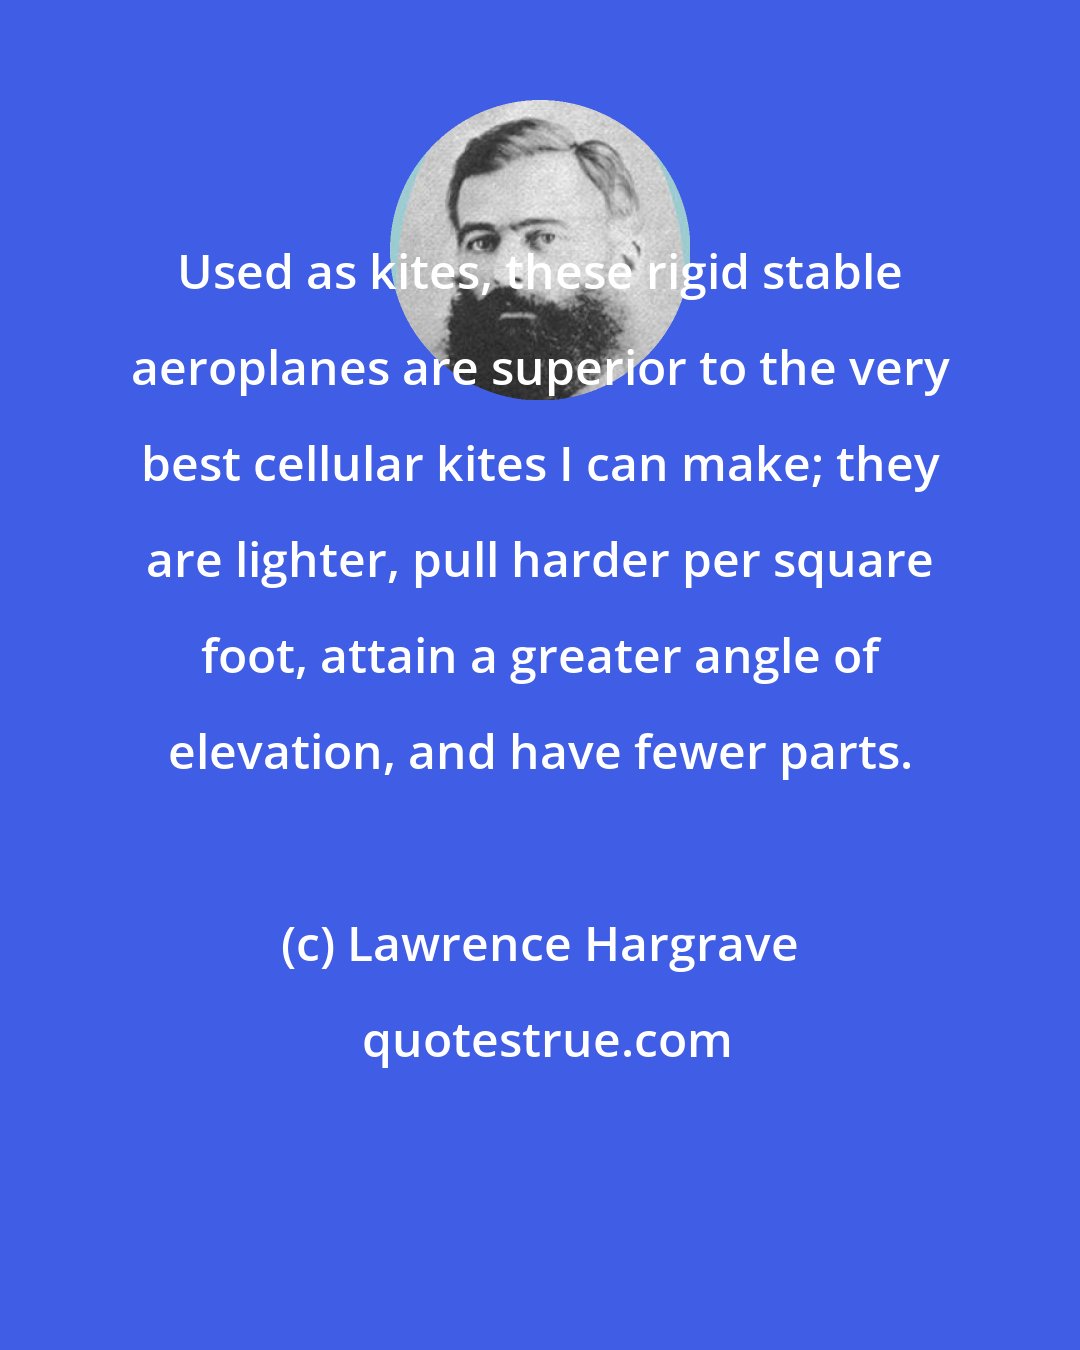 Lawrence Hargrave: Used as kites, these rigid stable aeroplanes are superior to the very best cellular kites I can make; they are lighter, pull harder per square foot, attain a greater angle of elevation, and have fewer parts.